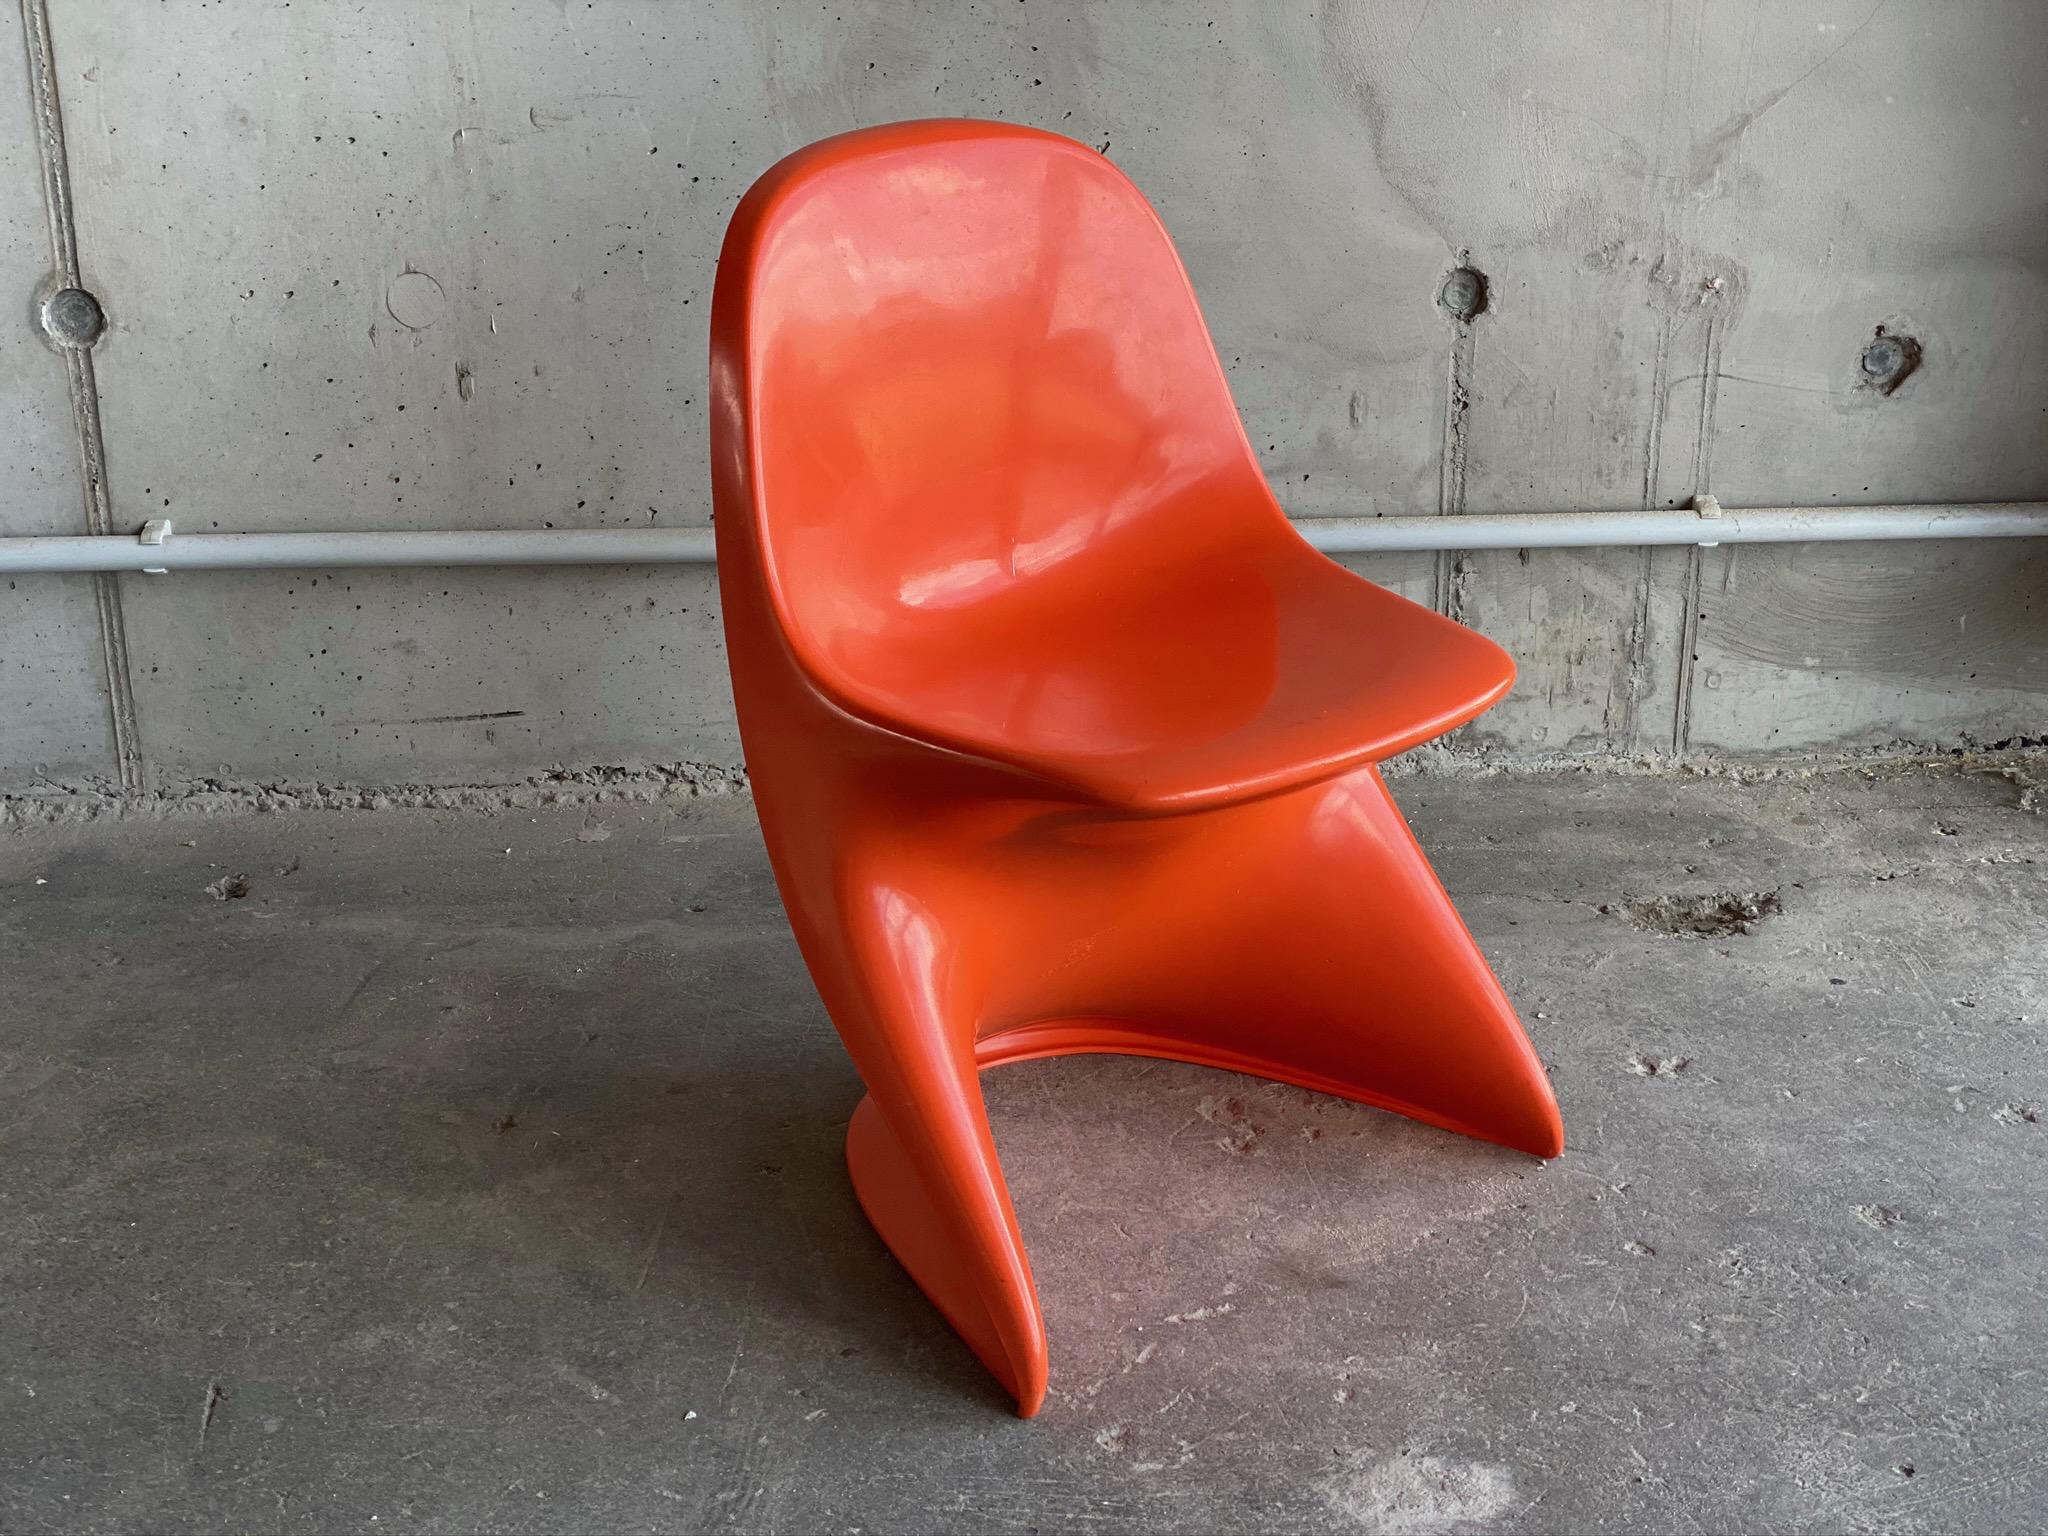 Typical 1970s children's chair made of plastic in orange. The Casalino I from the manufacturer Casala is a one-piece plastic chair. Casala is originally a German company that became famous for its school furniture. The small retro-orange chair